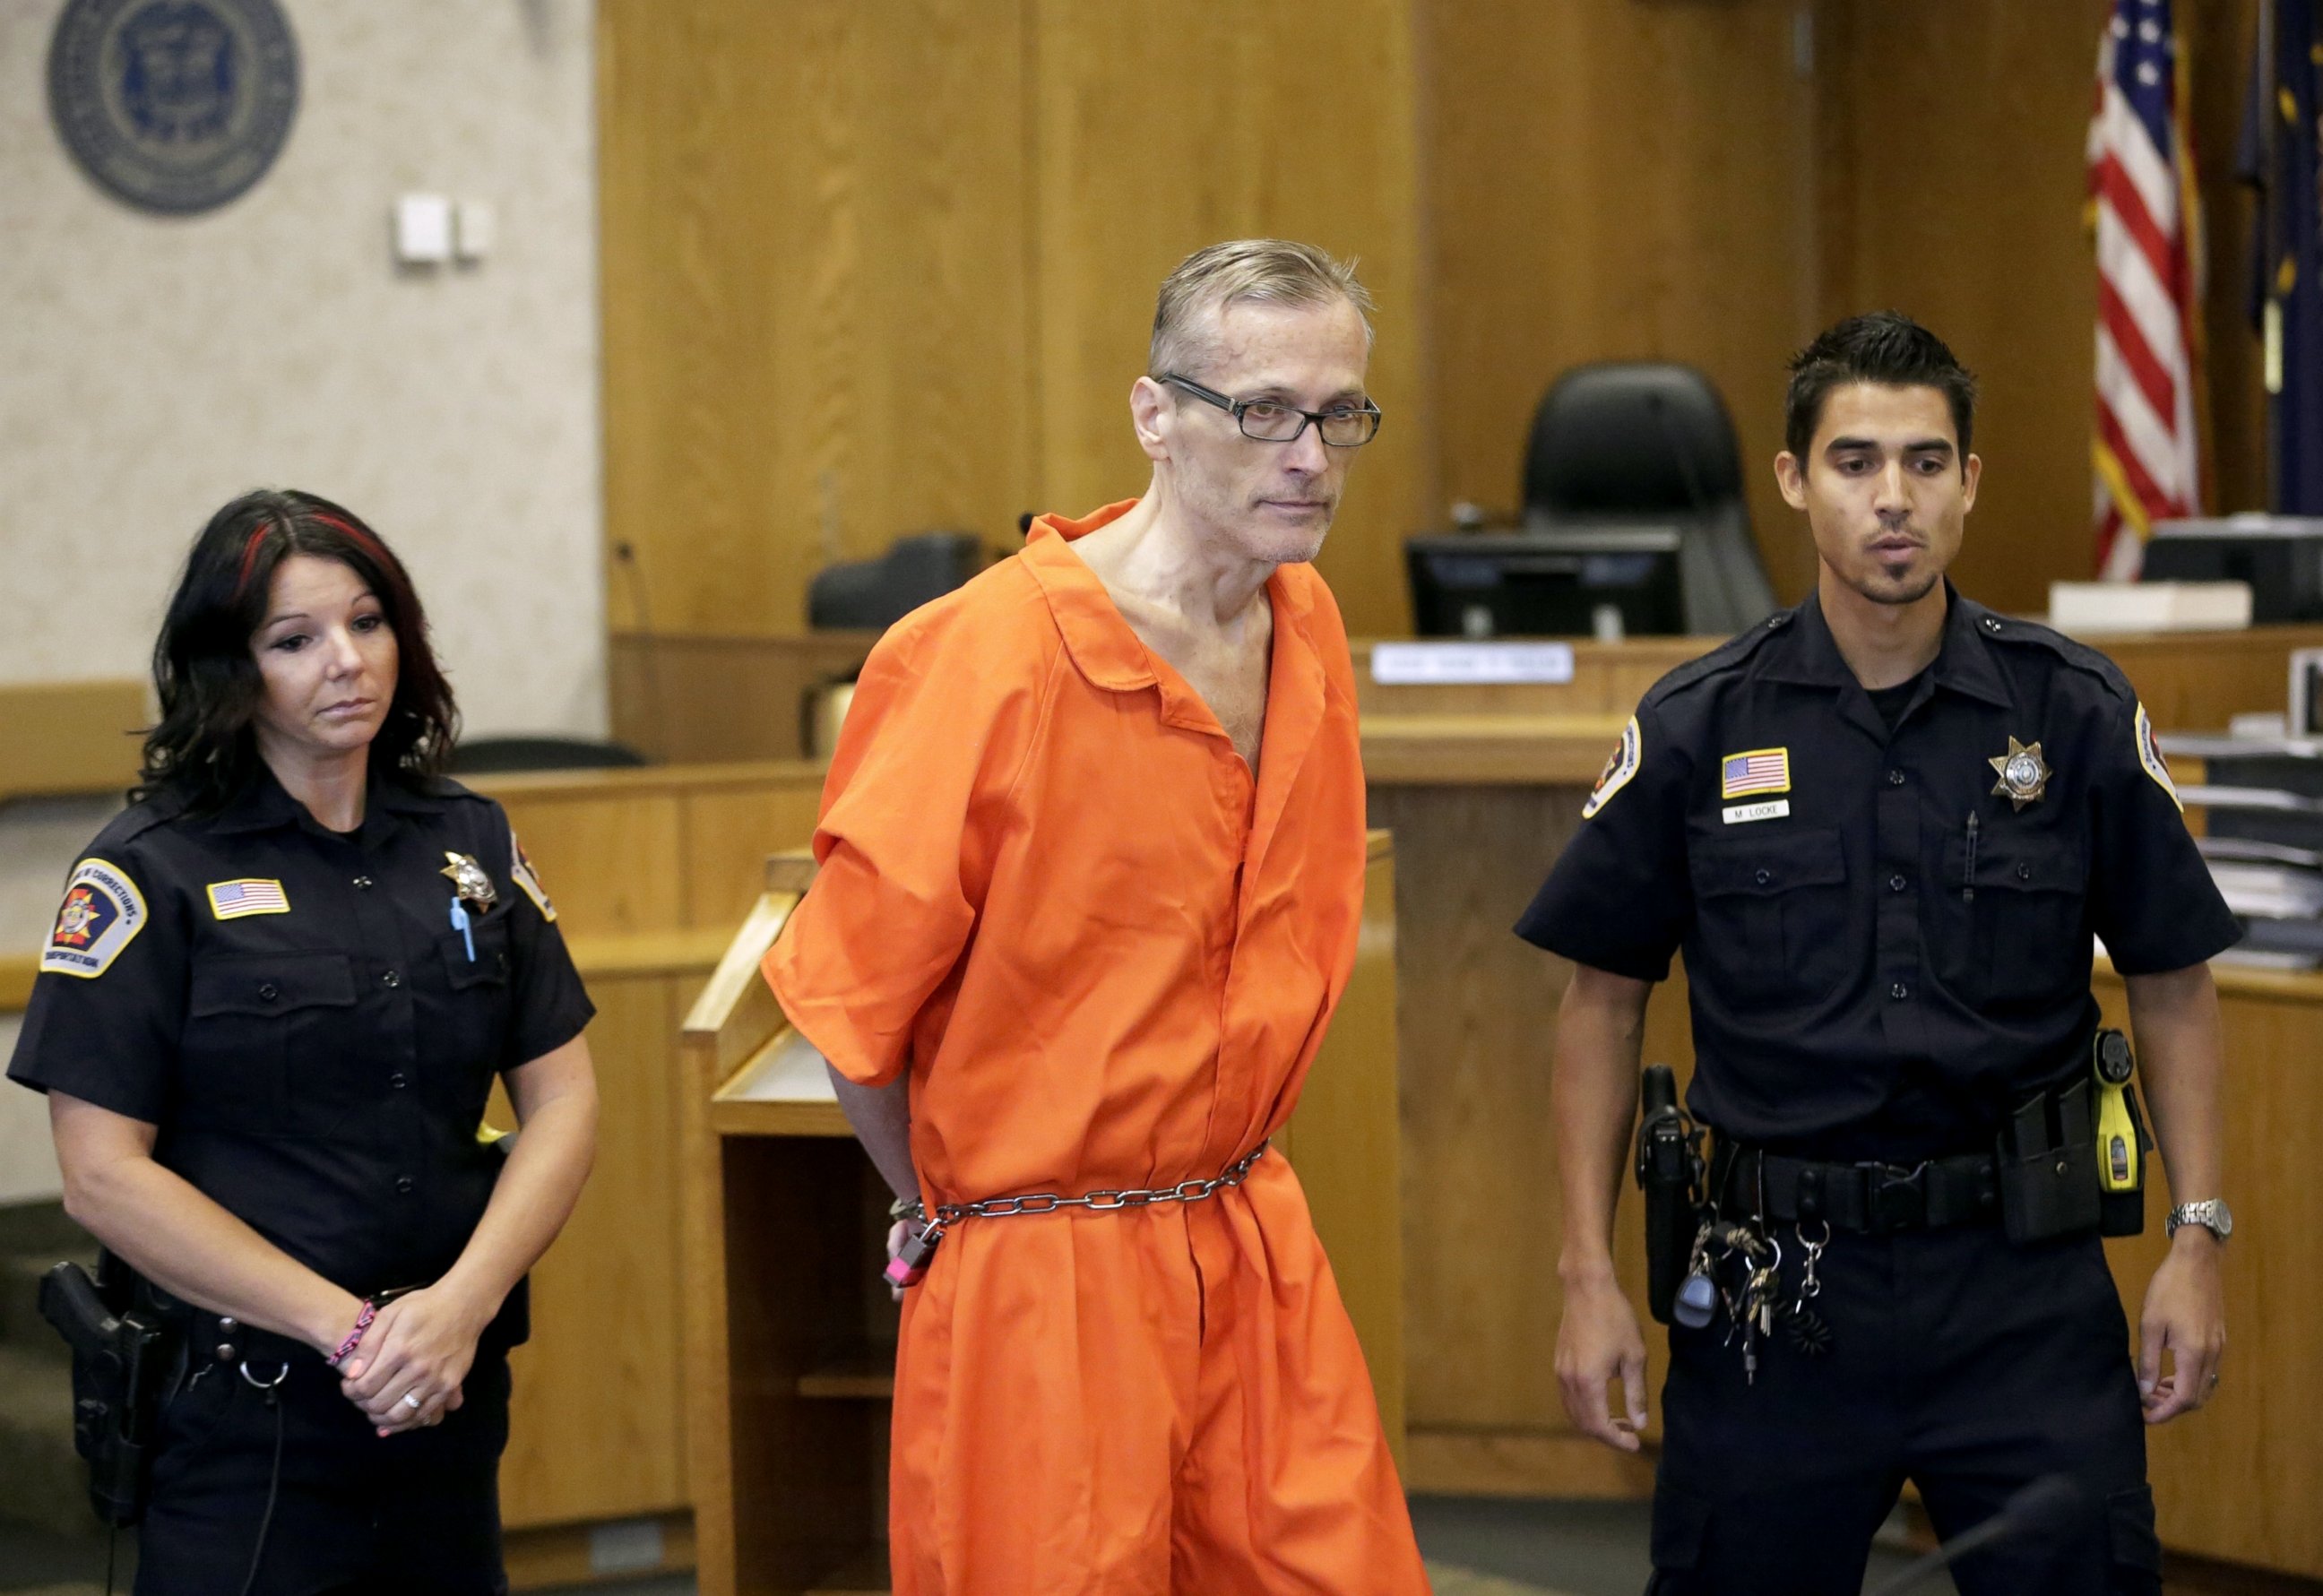 PHOTO: Martin Joseph MacNeill enters the courtroom before his sentencing, in Provo, Utah, Sept. 19, 2014.